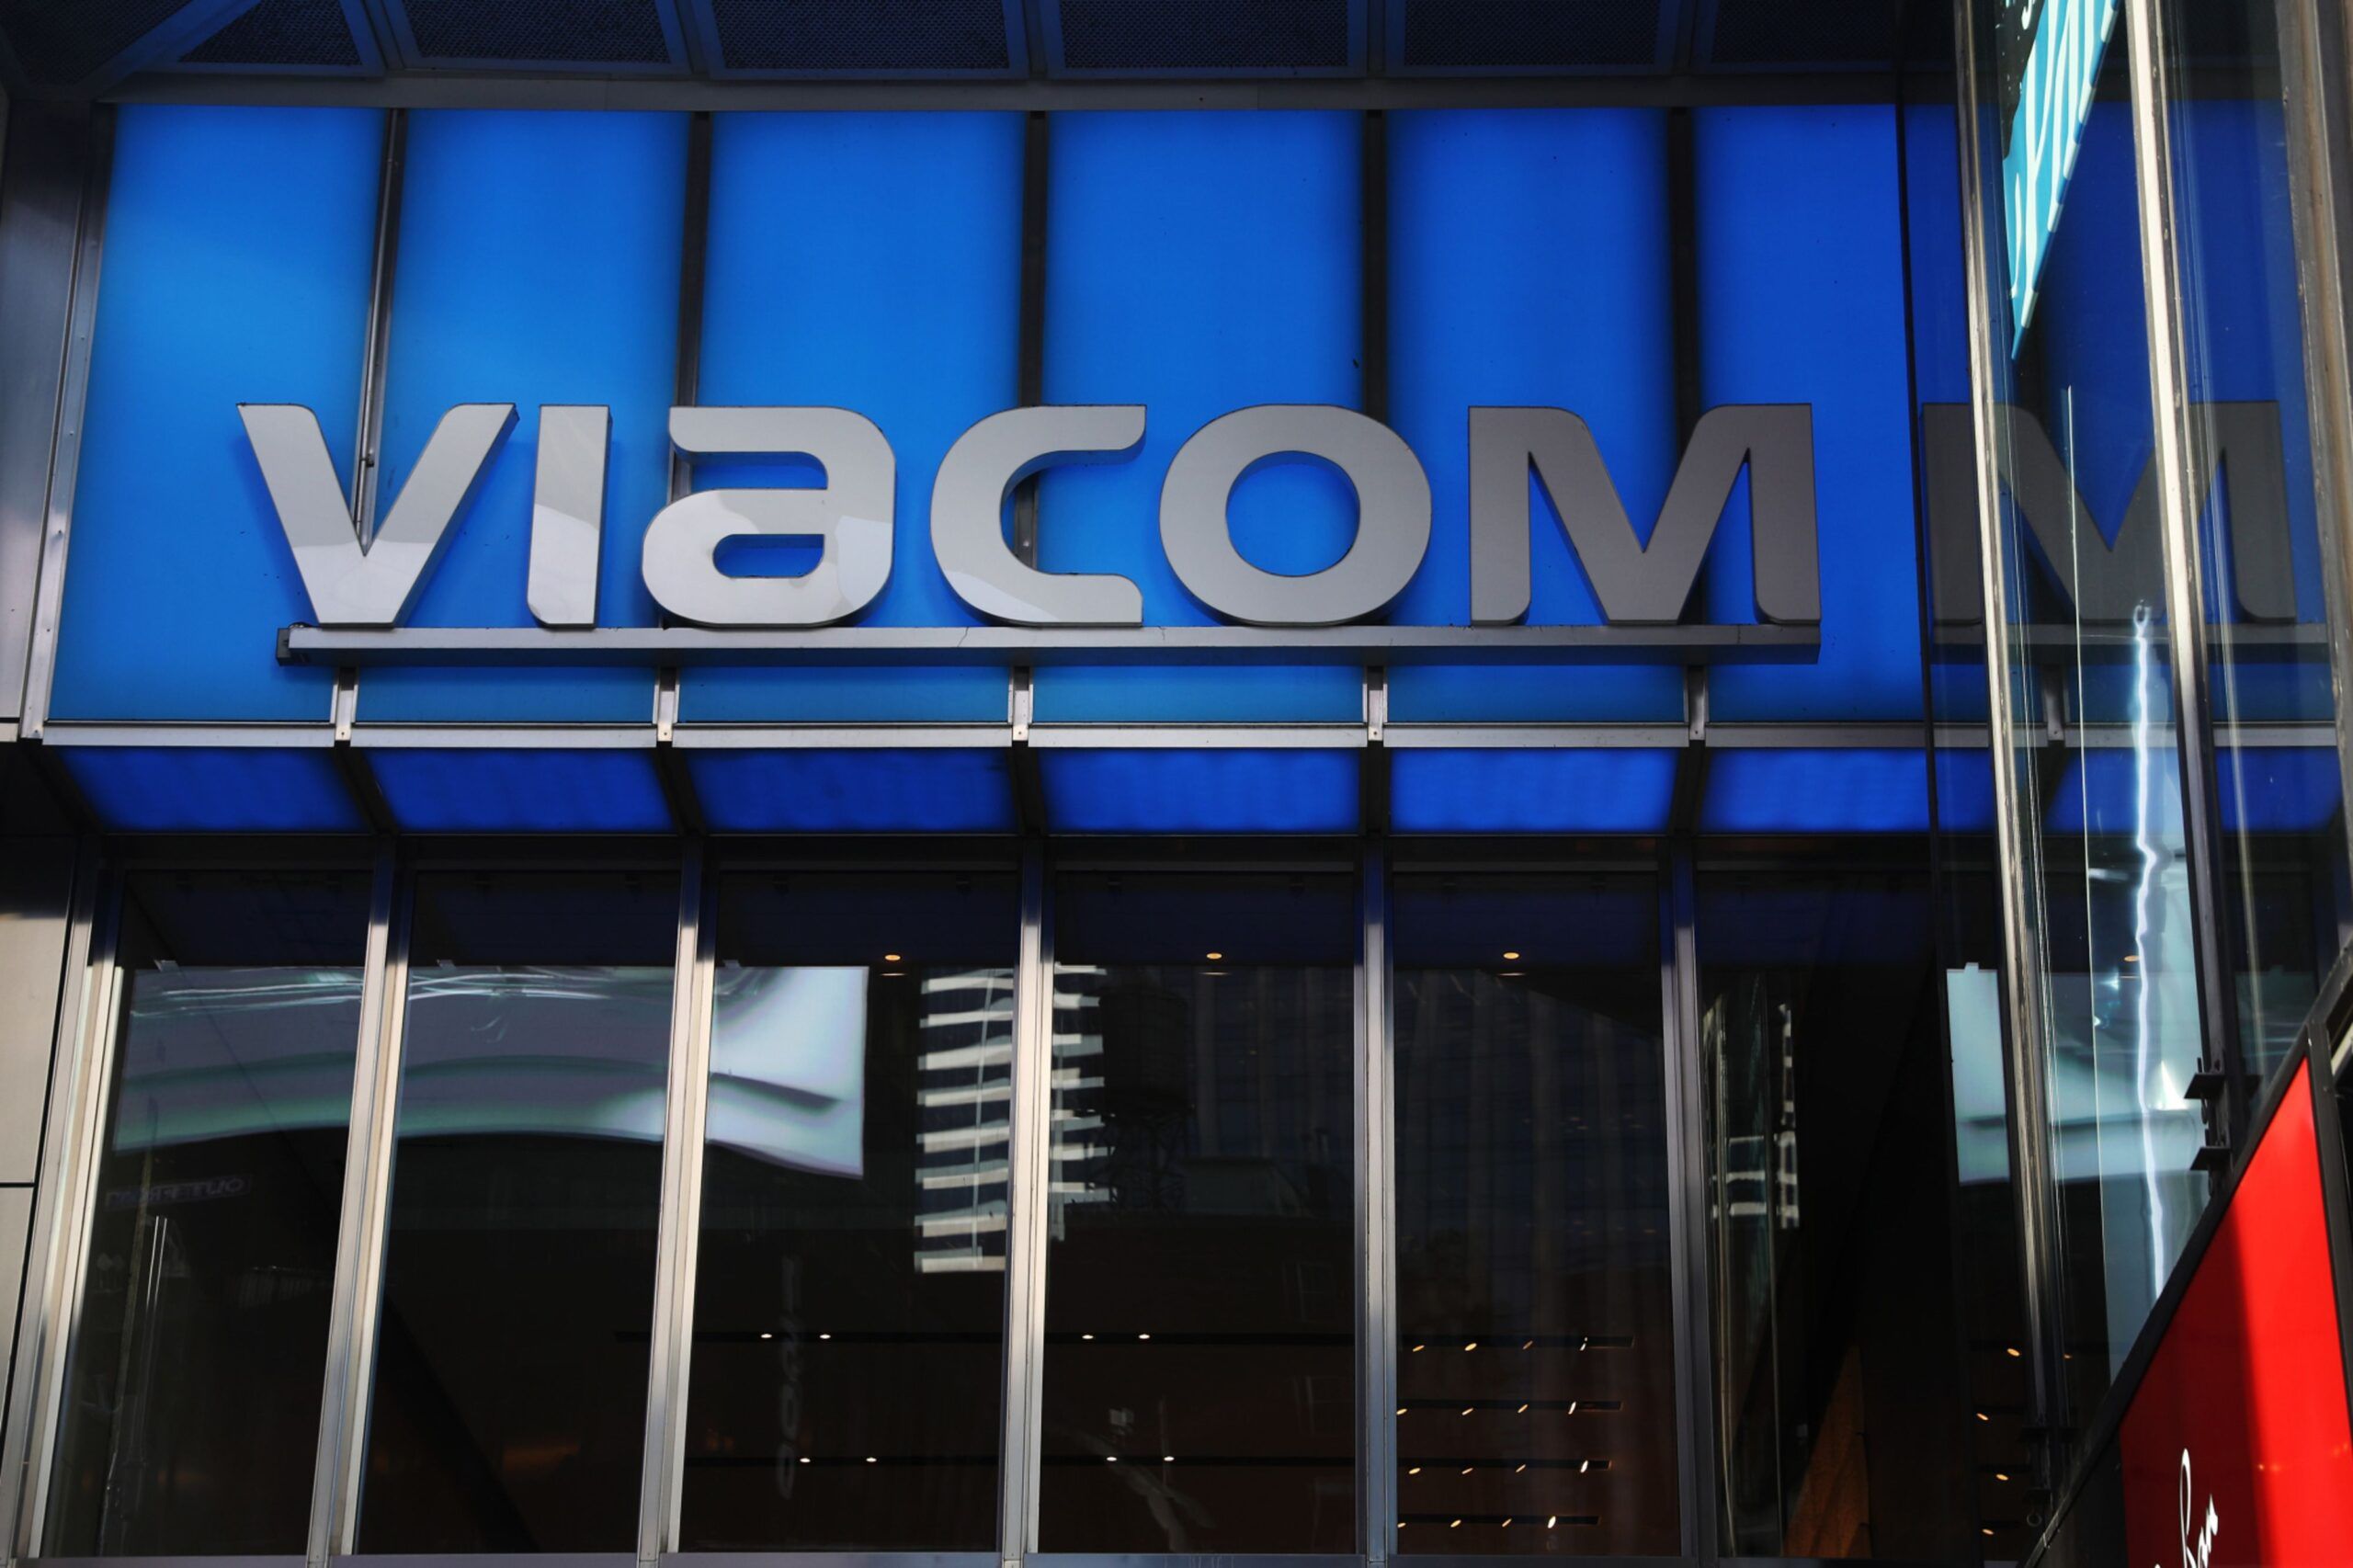 Signage is displayed outside of Viacom Inc. headquarters in New York, U.S. Viacom Inc. is scheduled to release earnings figures on February 8. Photographer: Victor J. Blue/Bloomberg